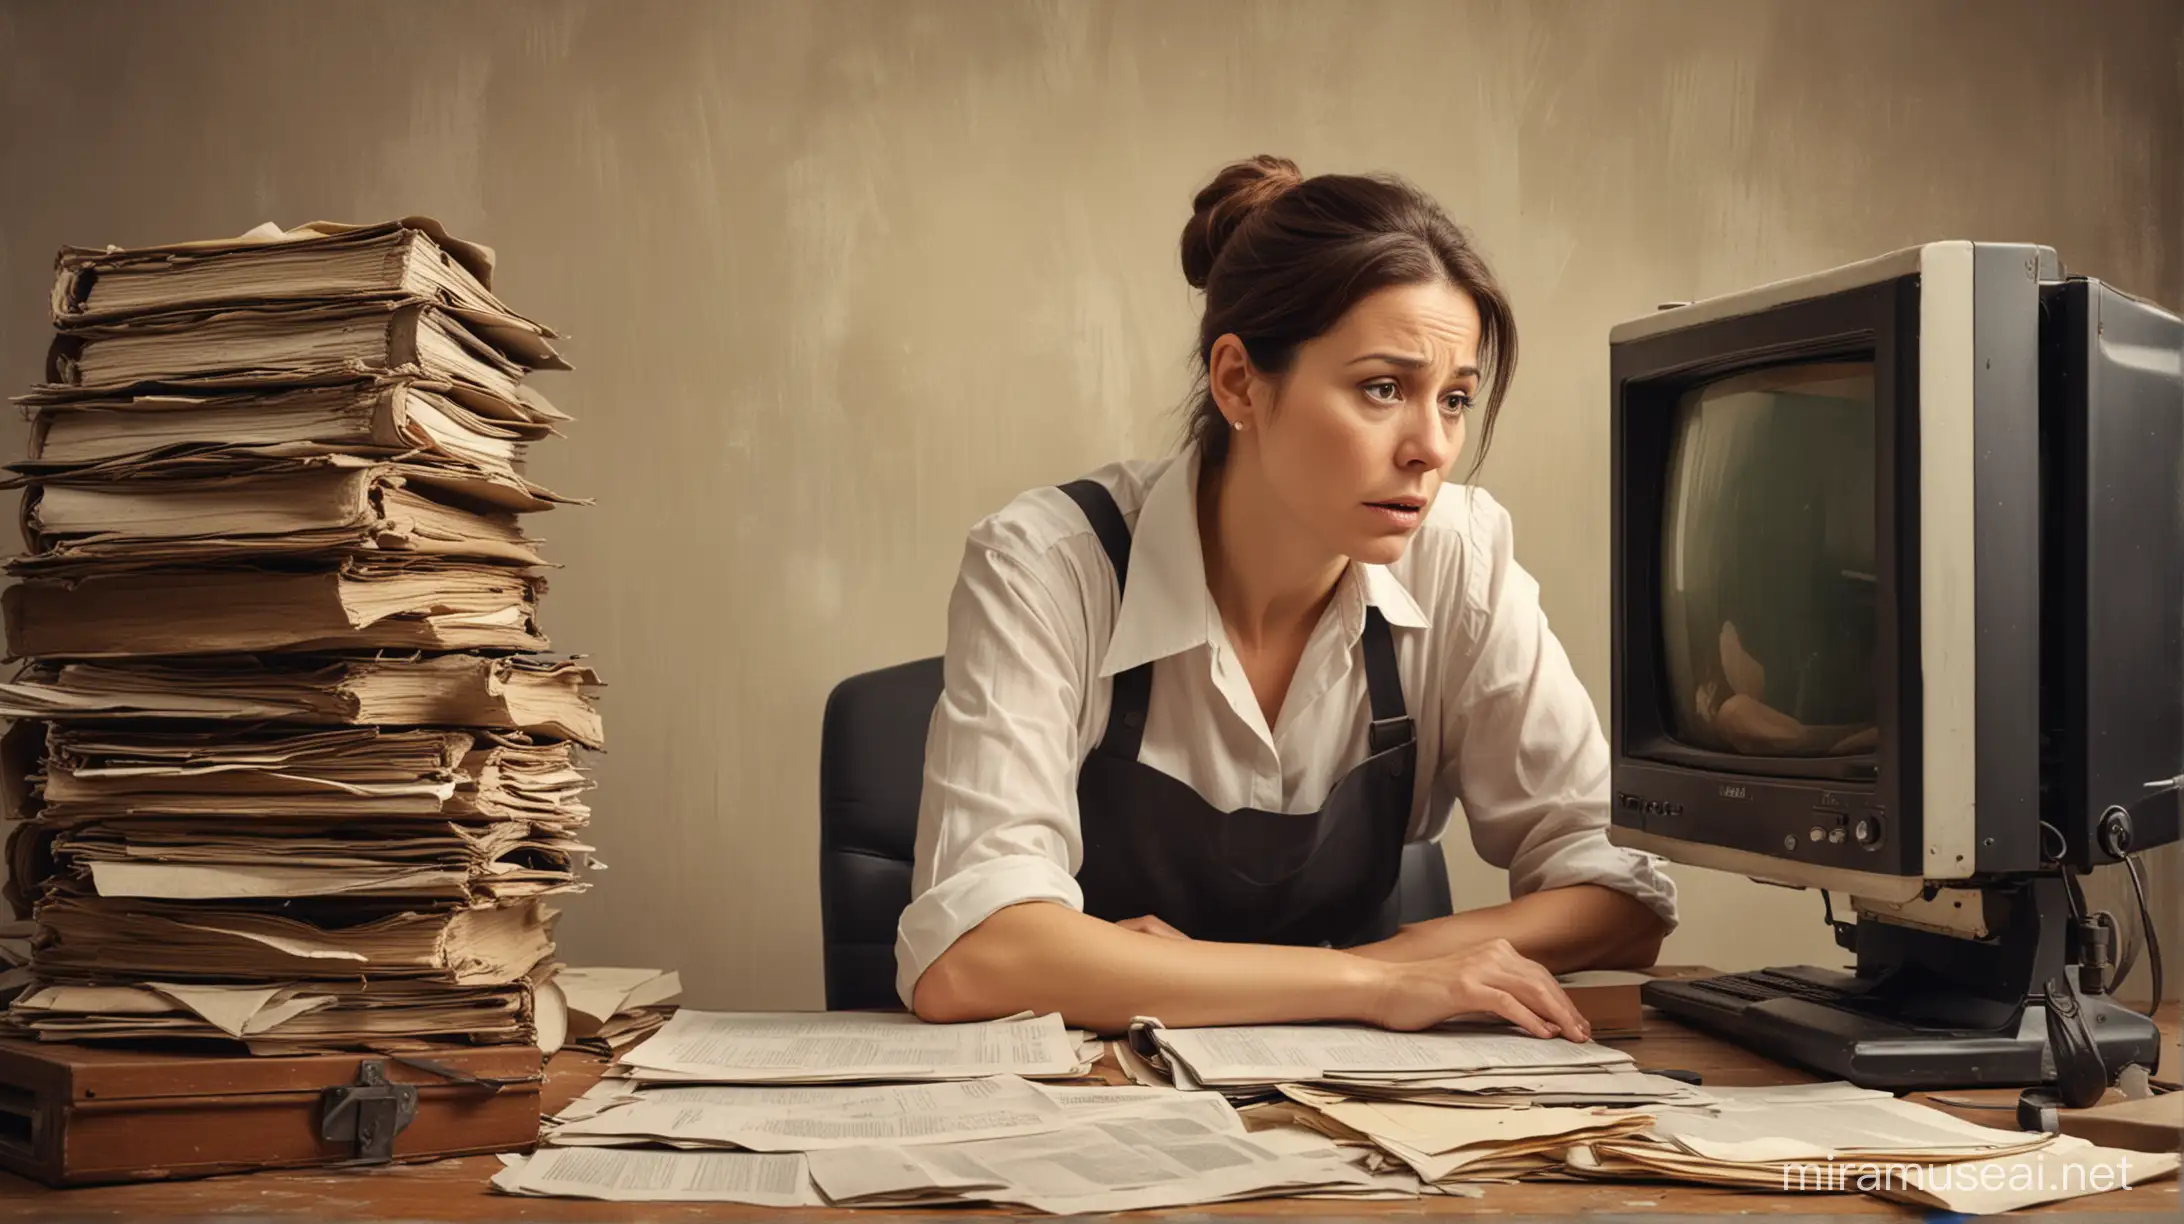 40 year old female employee looking at very old computer, frustrated, lots of documents on her desk, oil paint style